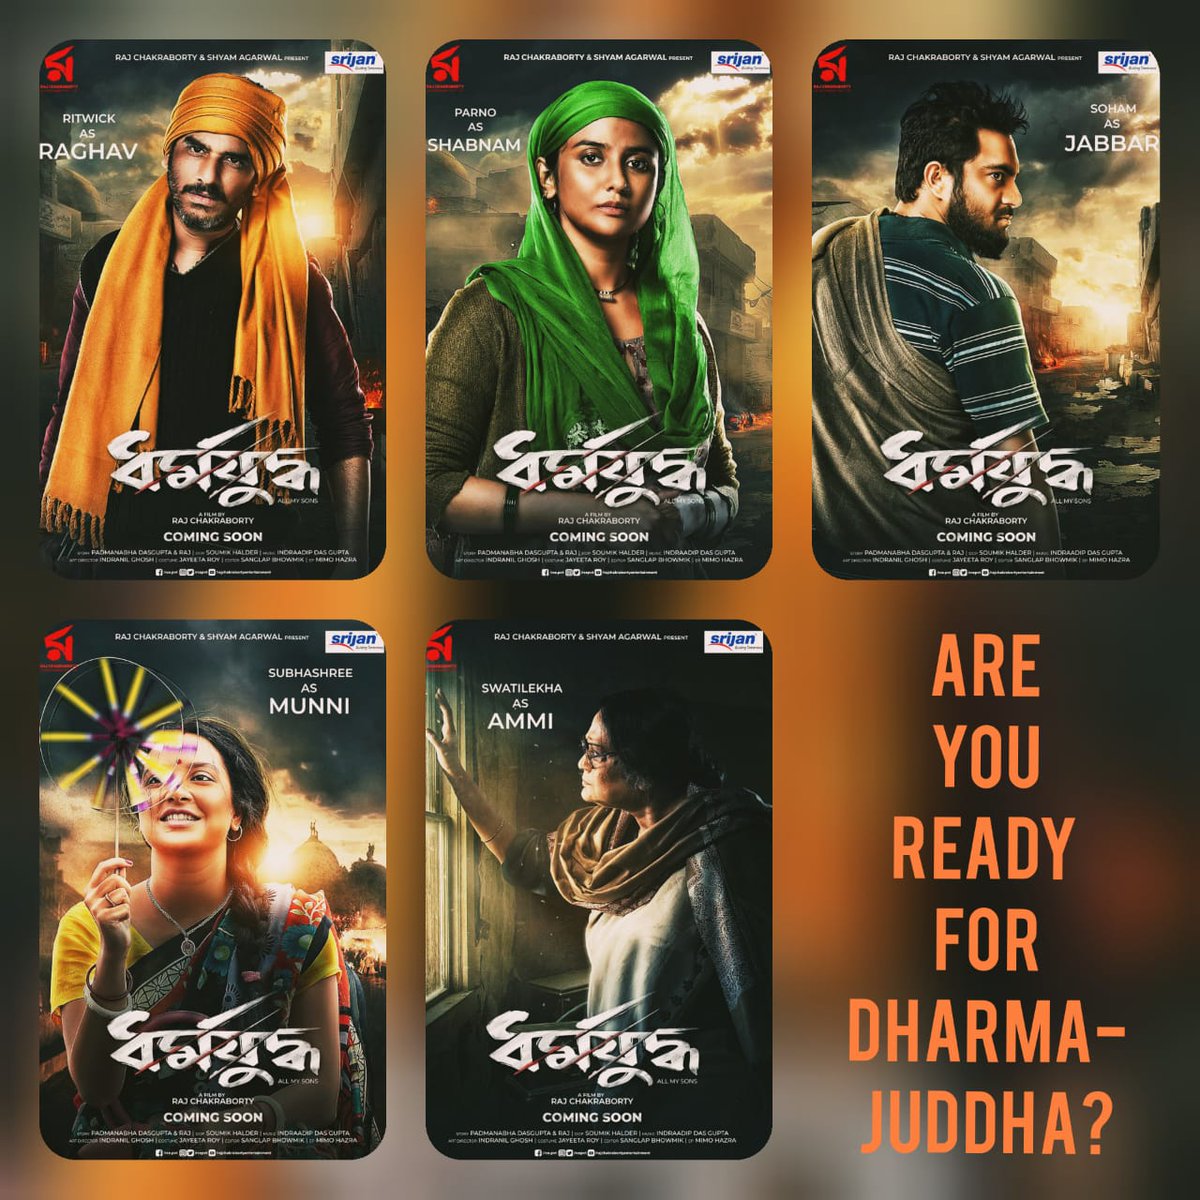 The first look revelation of the characters in the movie #Dharmajuddha. The posters are looking brilliant. Eagerly waiting for the trailer of this film.

@iamrajchoco @RCEpvt @subhashreesotwe @myslf_soham @parnomittra @iindraadip @hijbjjibij